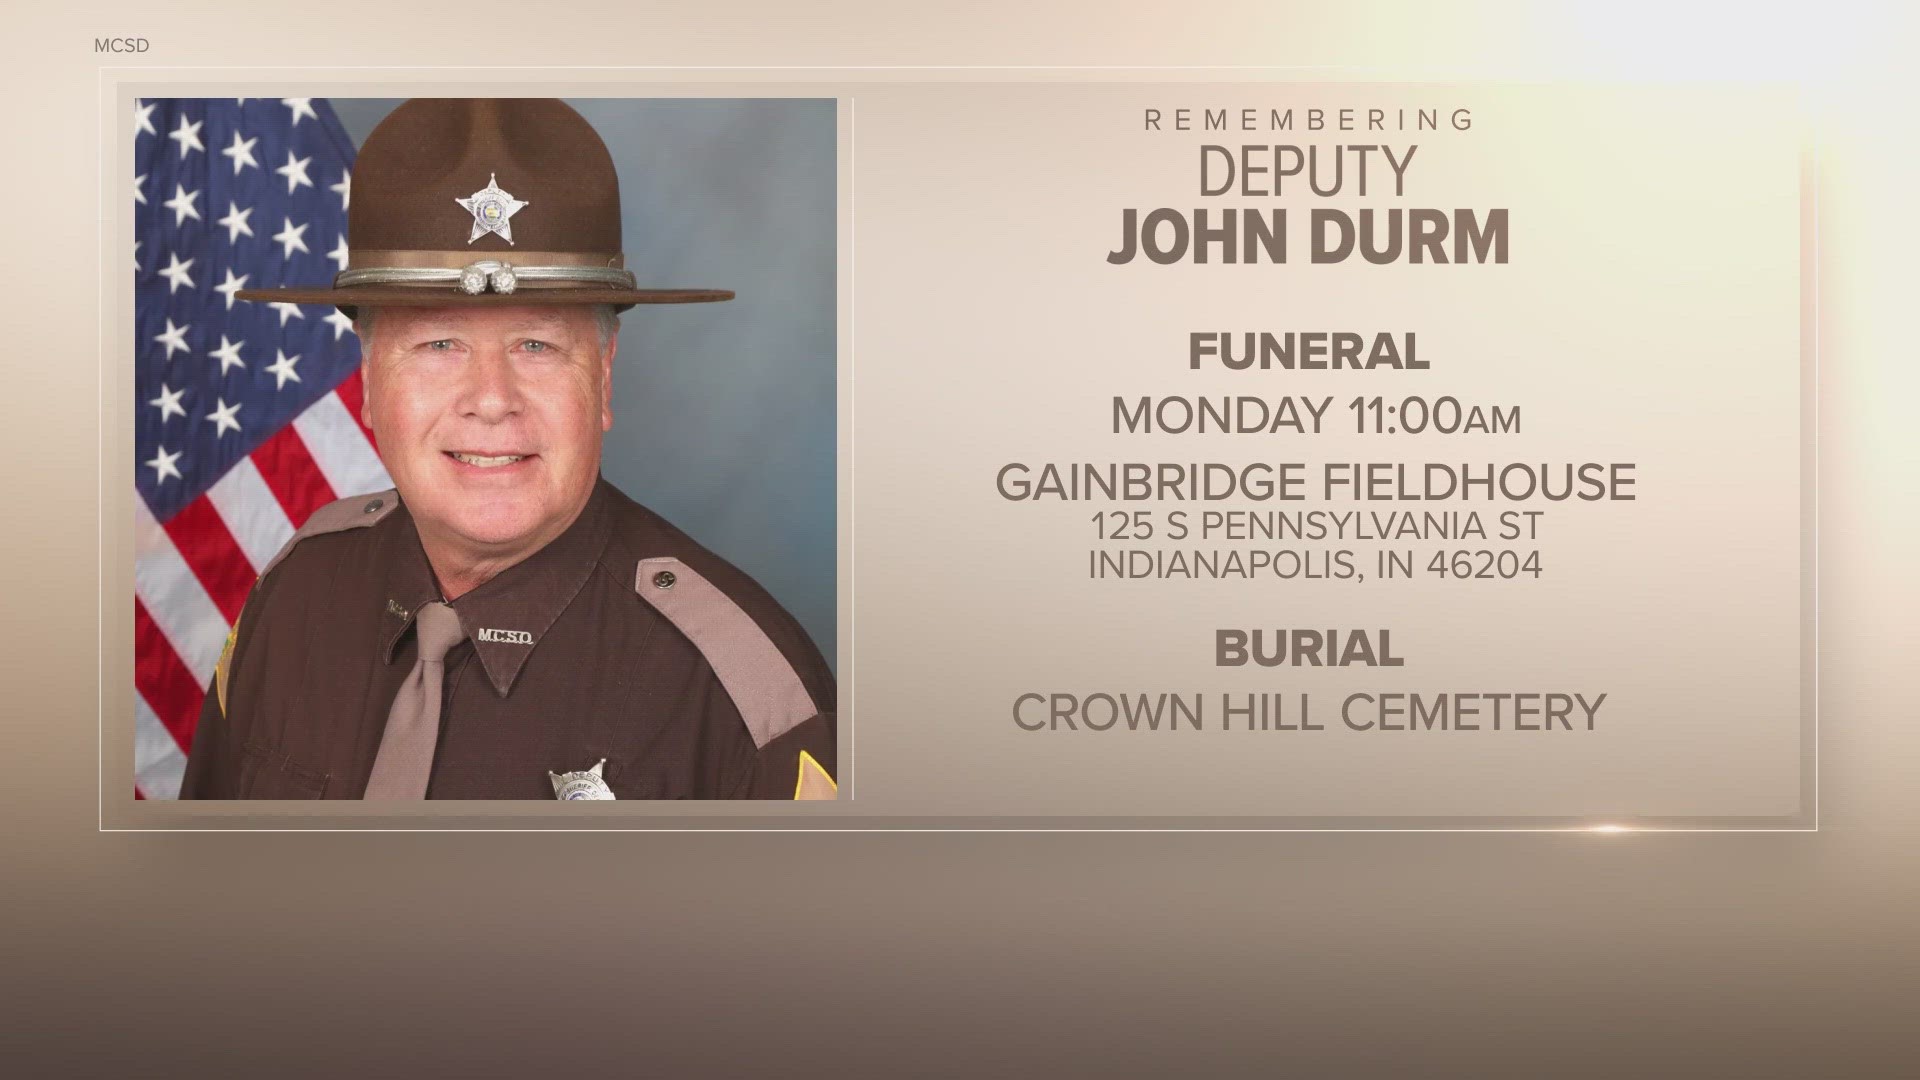 Family, friends and fellow officers have been stopping by the Scottish Rite Cathedral to pay tribute to Deputy John Durm.